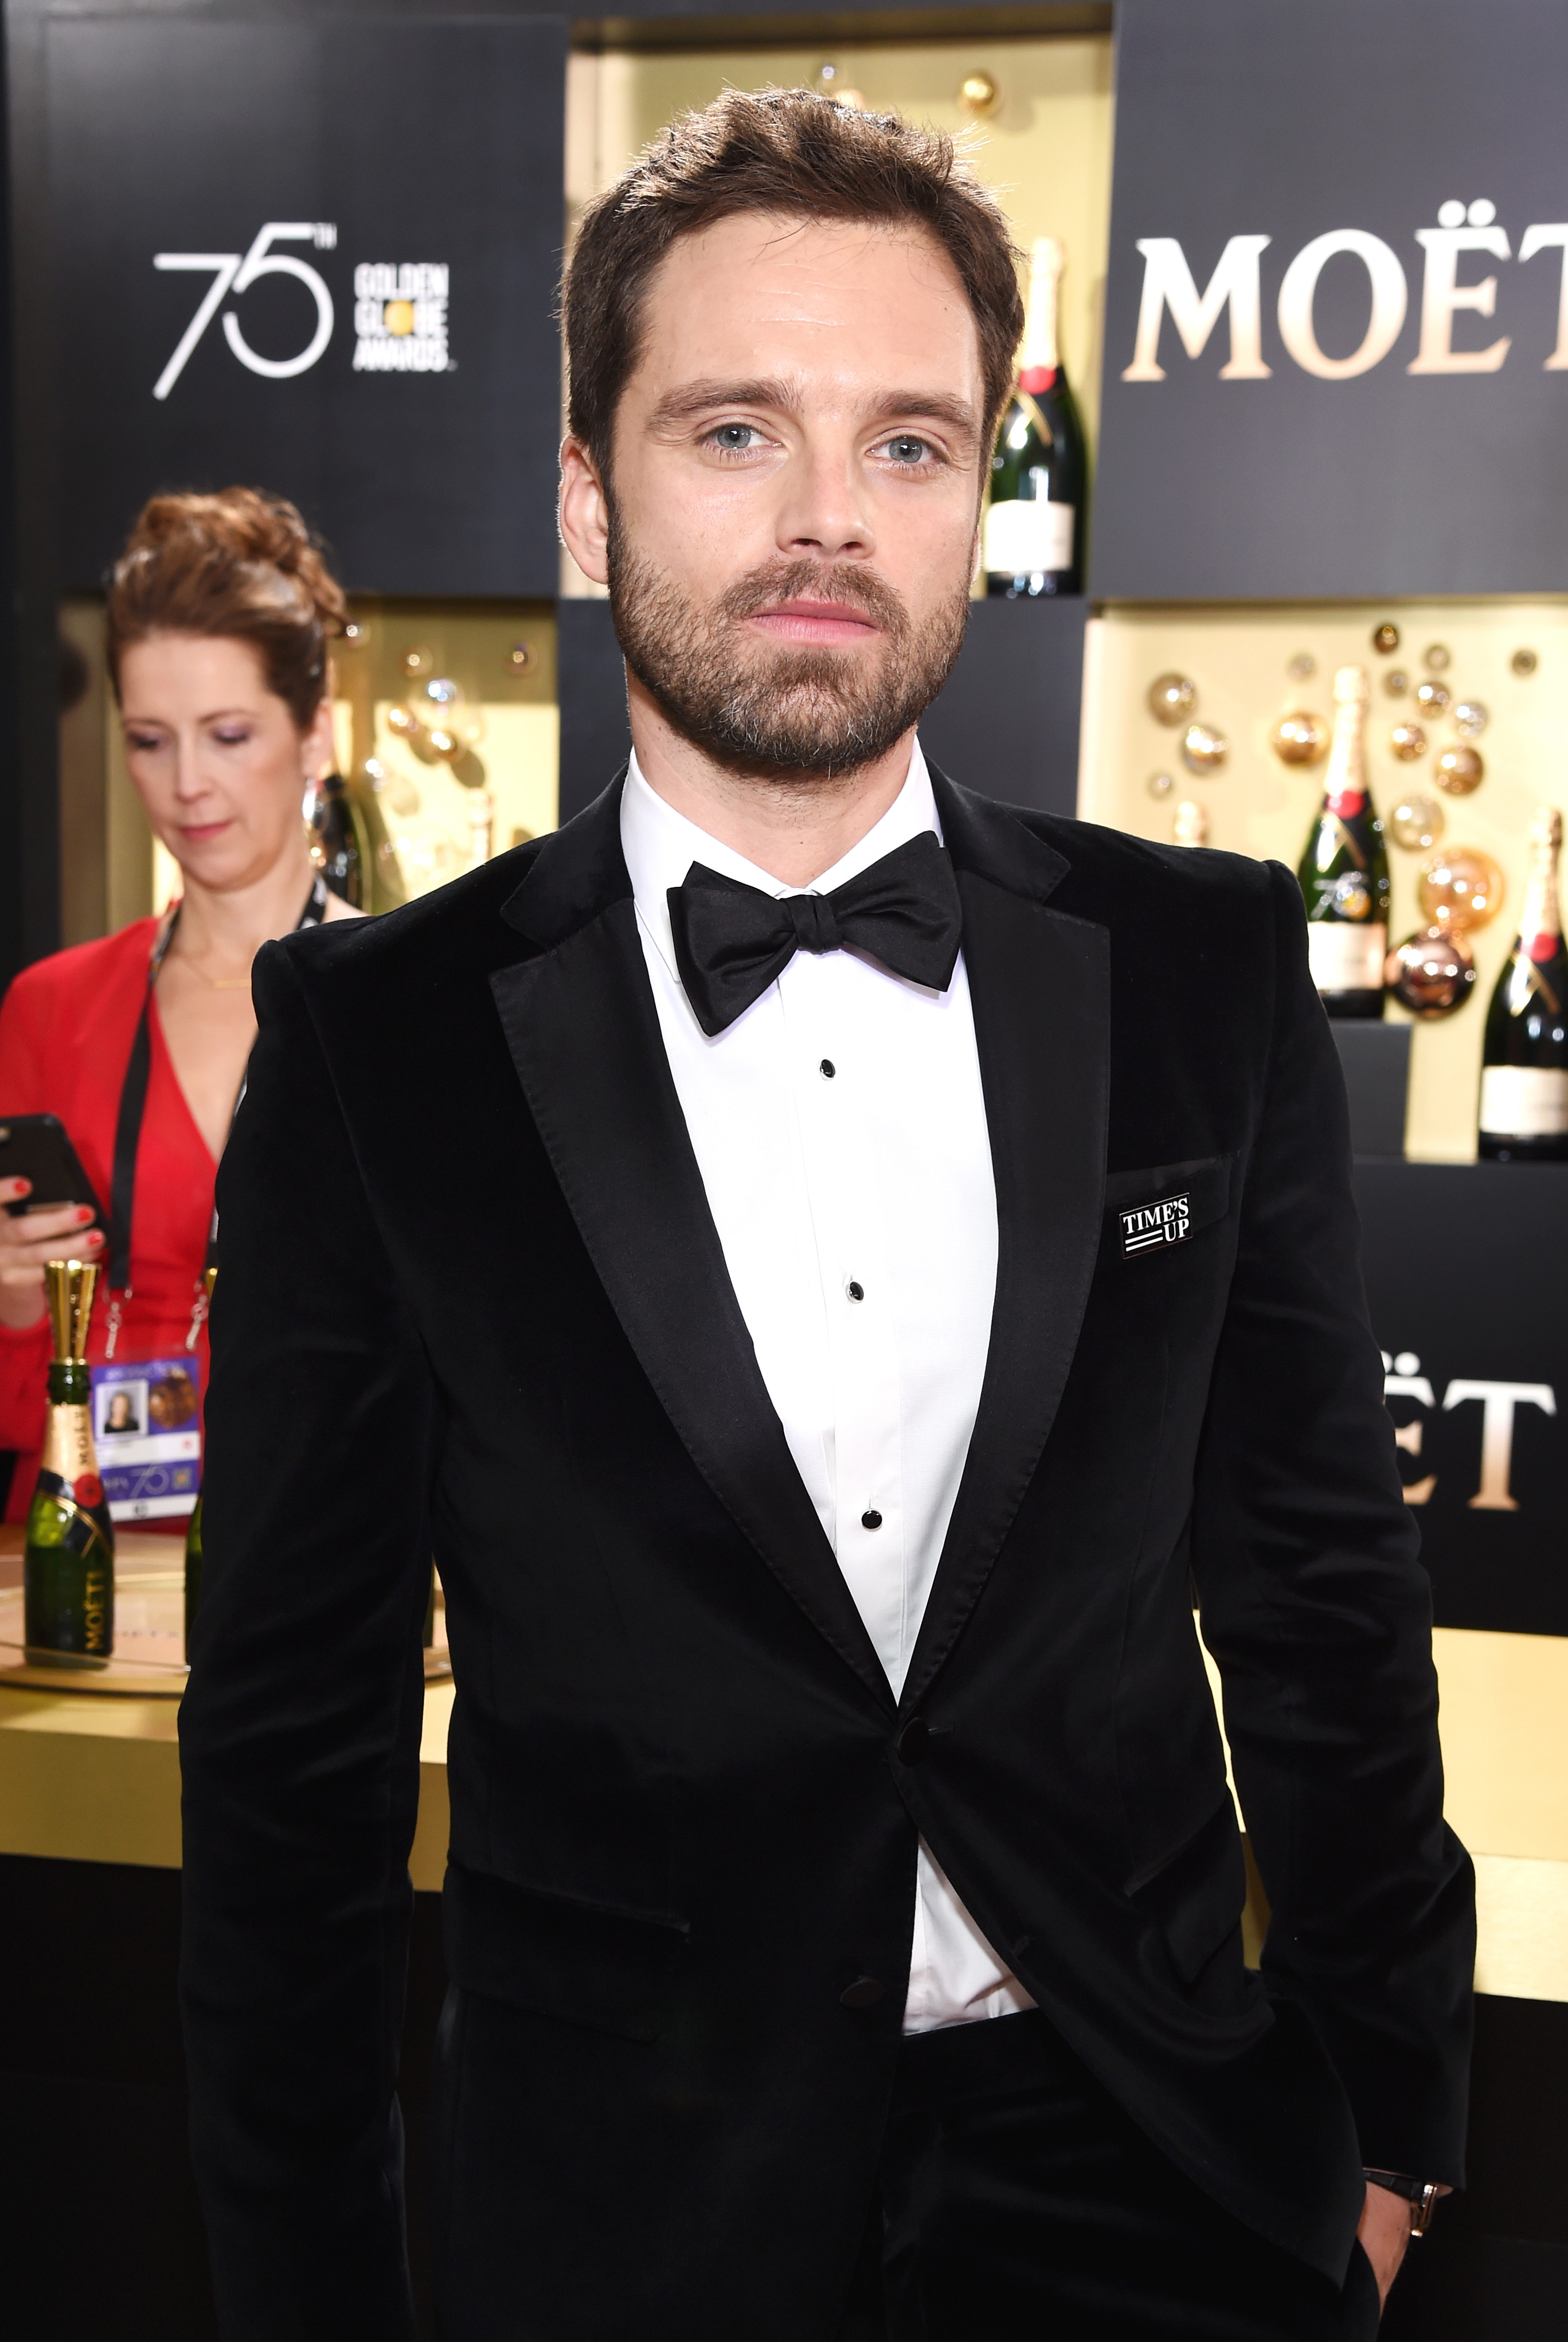 Actor Sebastian Stan celebrates The 75th Annual Golden Globe Awards with Moet &amp; Chandon at The Beverly Hilton Hotel on January 7, 2018 in Beverly Hills, California. (Michael Kovac—Getty Images)